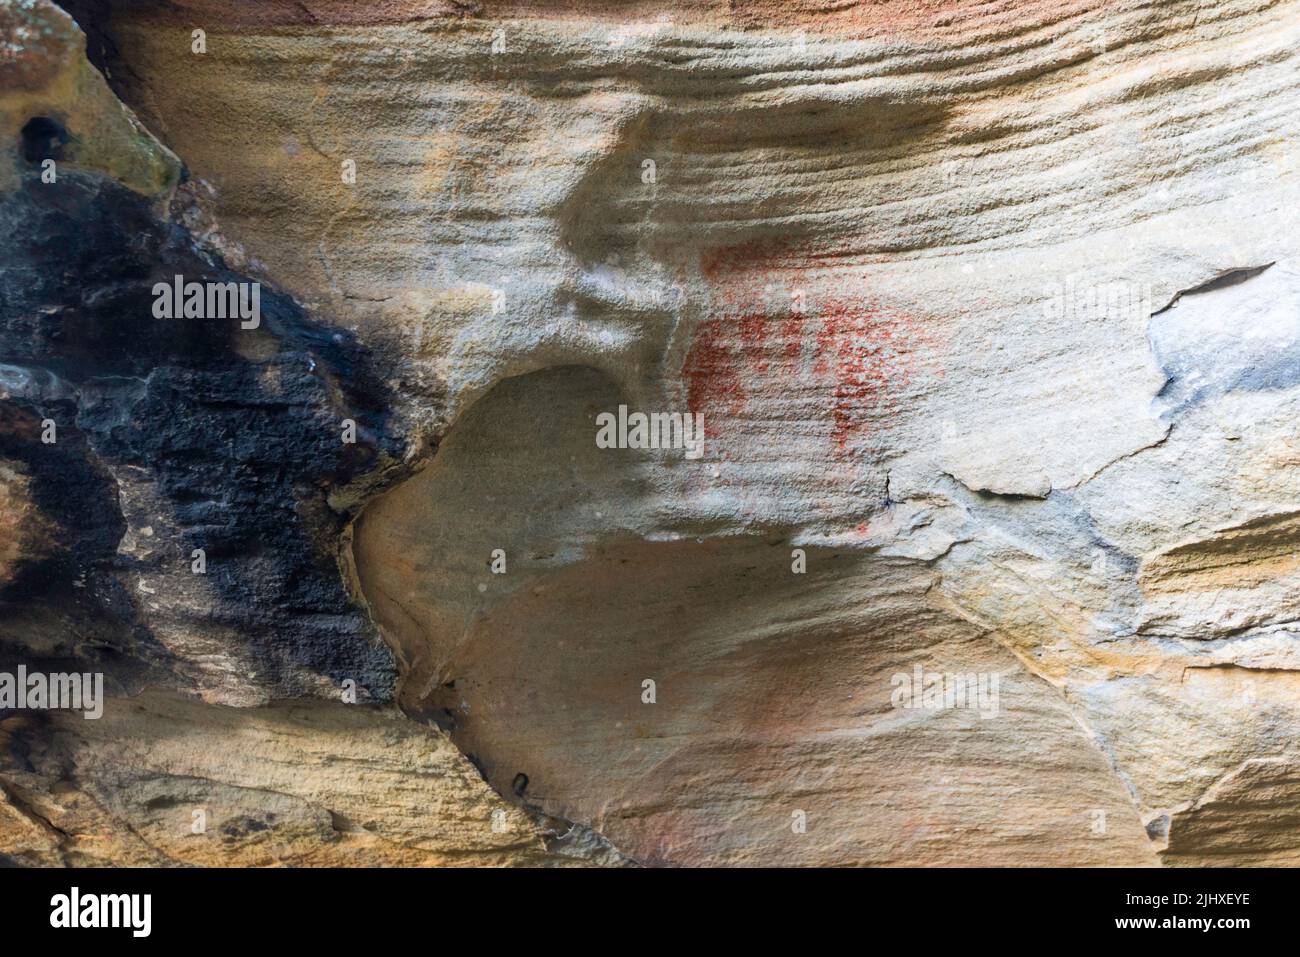 Red Hands Cave at West Head in Ku-ring-gai Chase National Park, Sydney contains ancient Aboriginal ochre rock paintings thought to be 2000 years old Stock Photo